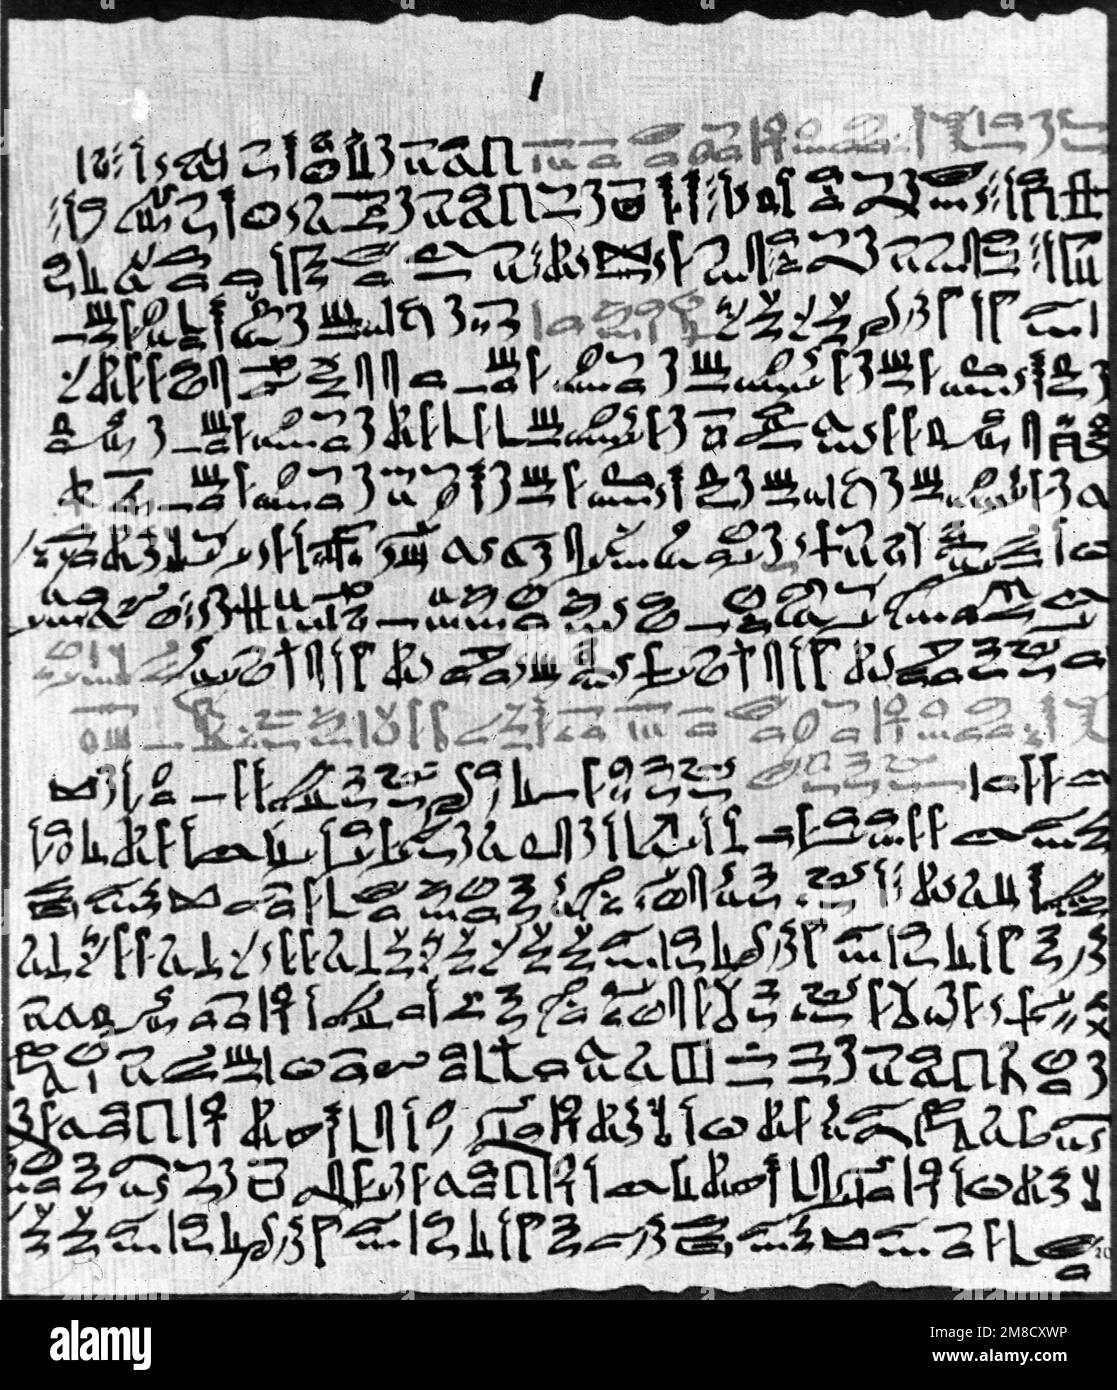 Ebers Papyrus. Sample of the Ebers Papyrus, dating back from about 1500 B.C., and one of the earliest surviving documents from Egypt. The Papyrus contains prescriptions written in hieroglyphics for over seven hundred remedies. Among the oldest and most important medical papyri of Ancient Egypt, it was purchased at Luxor in the winter of 1873–1874 by the German Egyptologist Georg Ebers. Stock Photo